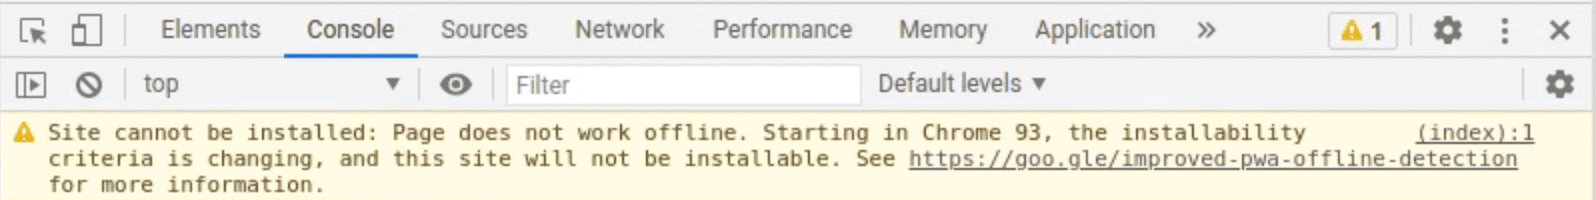 DevTools showing warning message in Console.